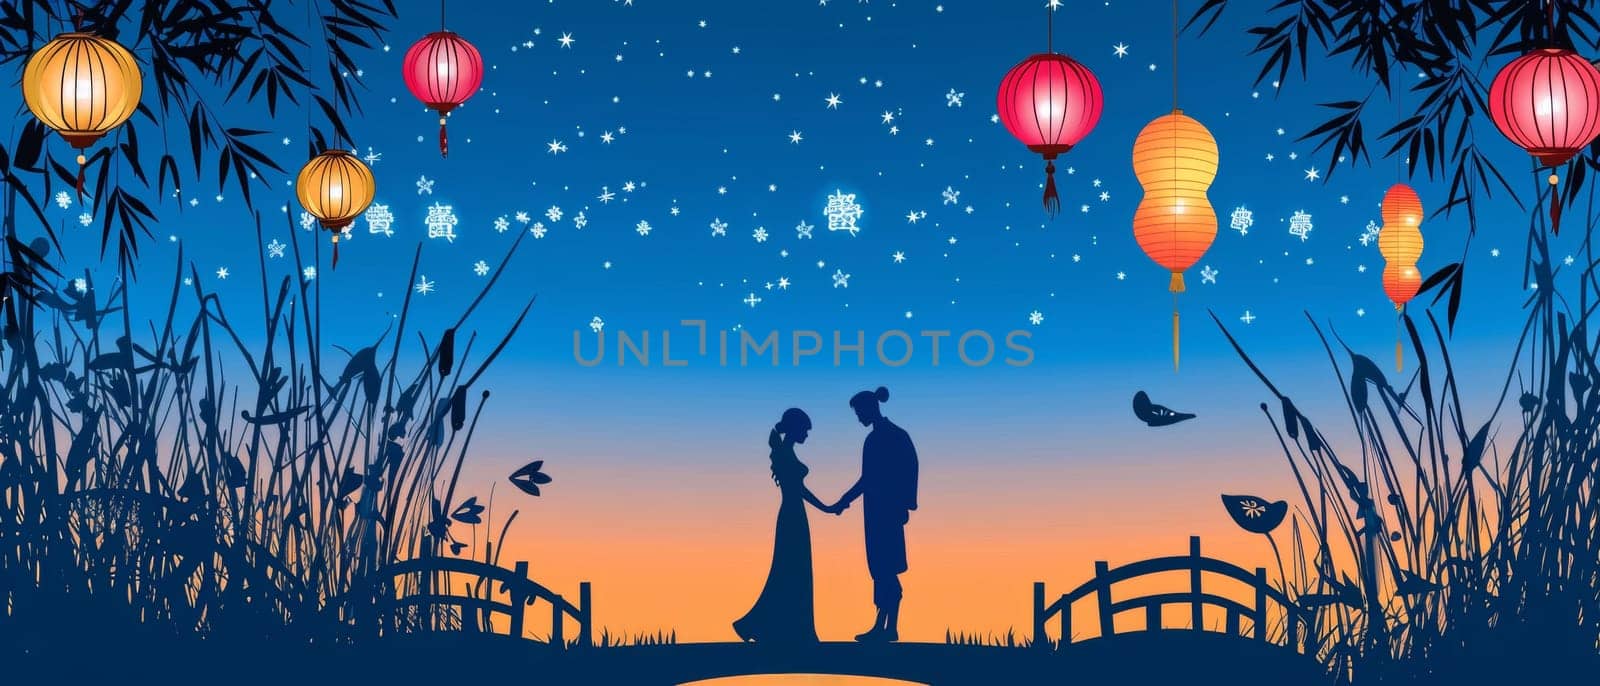 A serene Tanabata scene with silhouetted figures beneath a sky of stars and floating paper lanterns. by sfinks